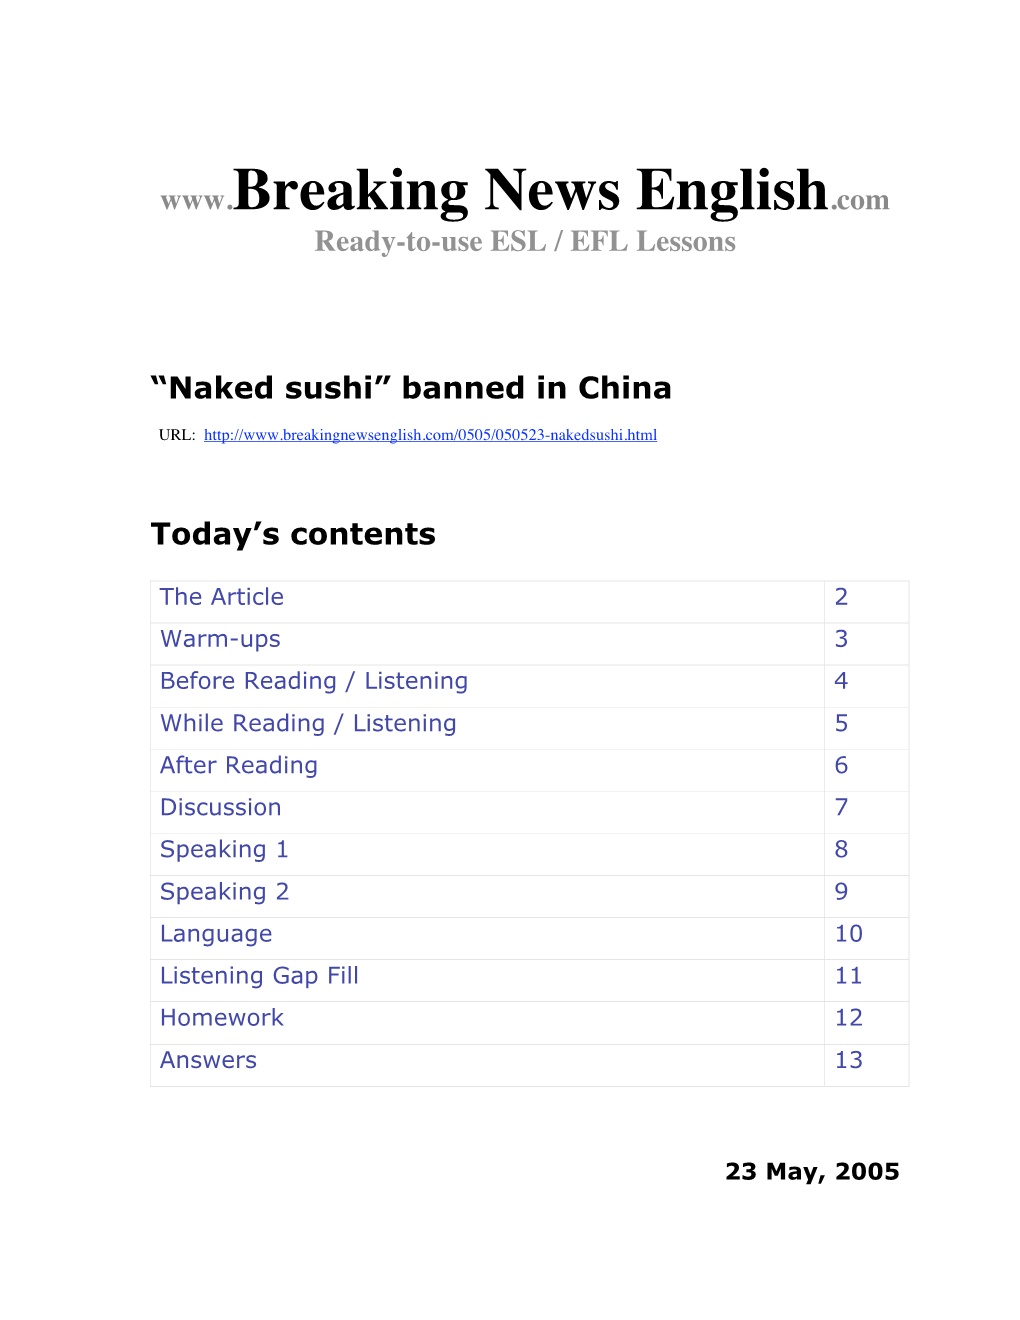 Naked Sushi” Banned in China